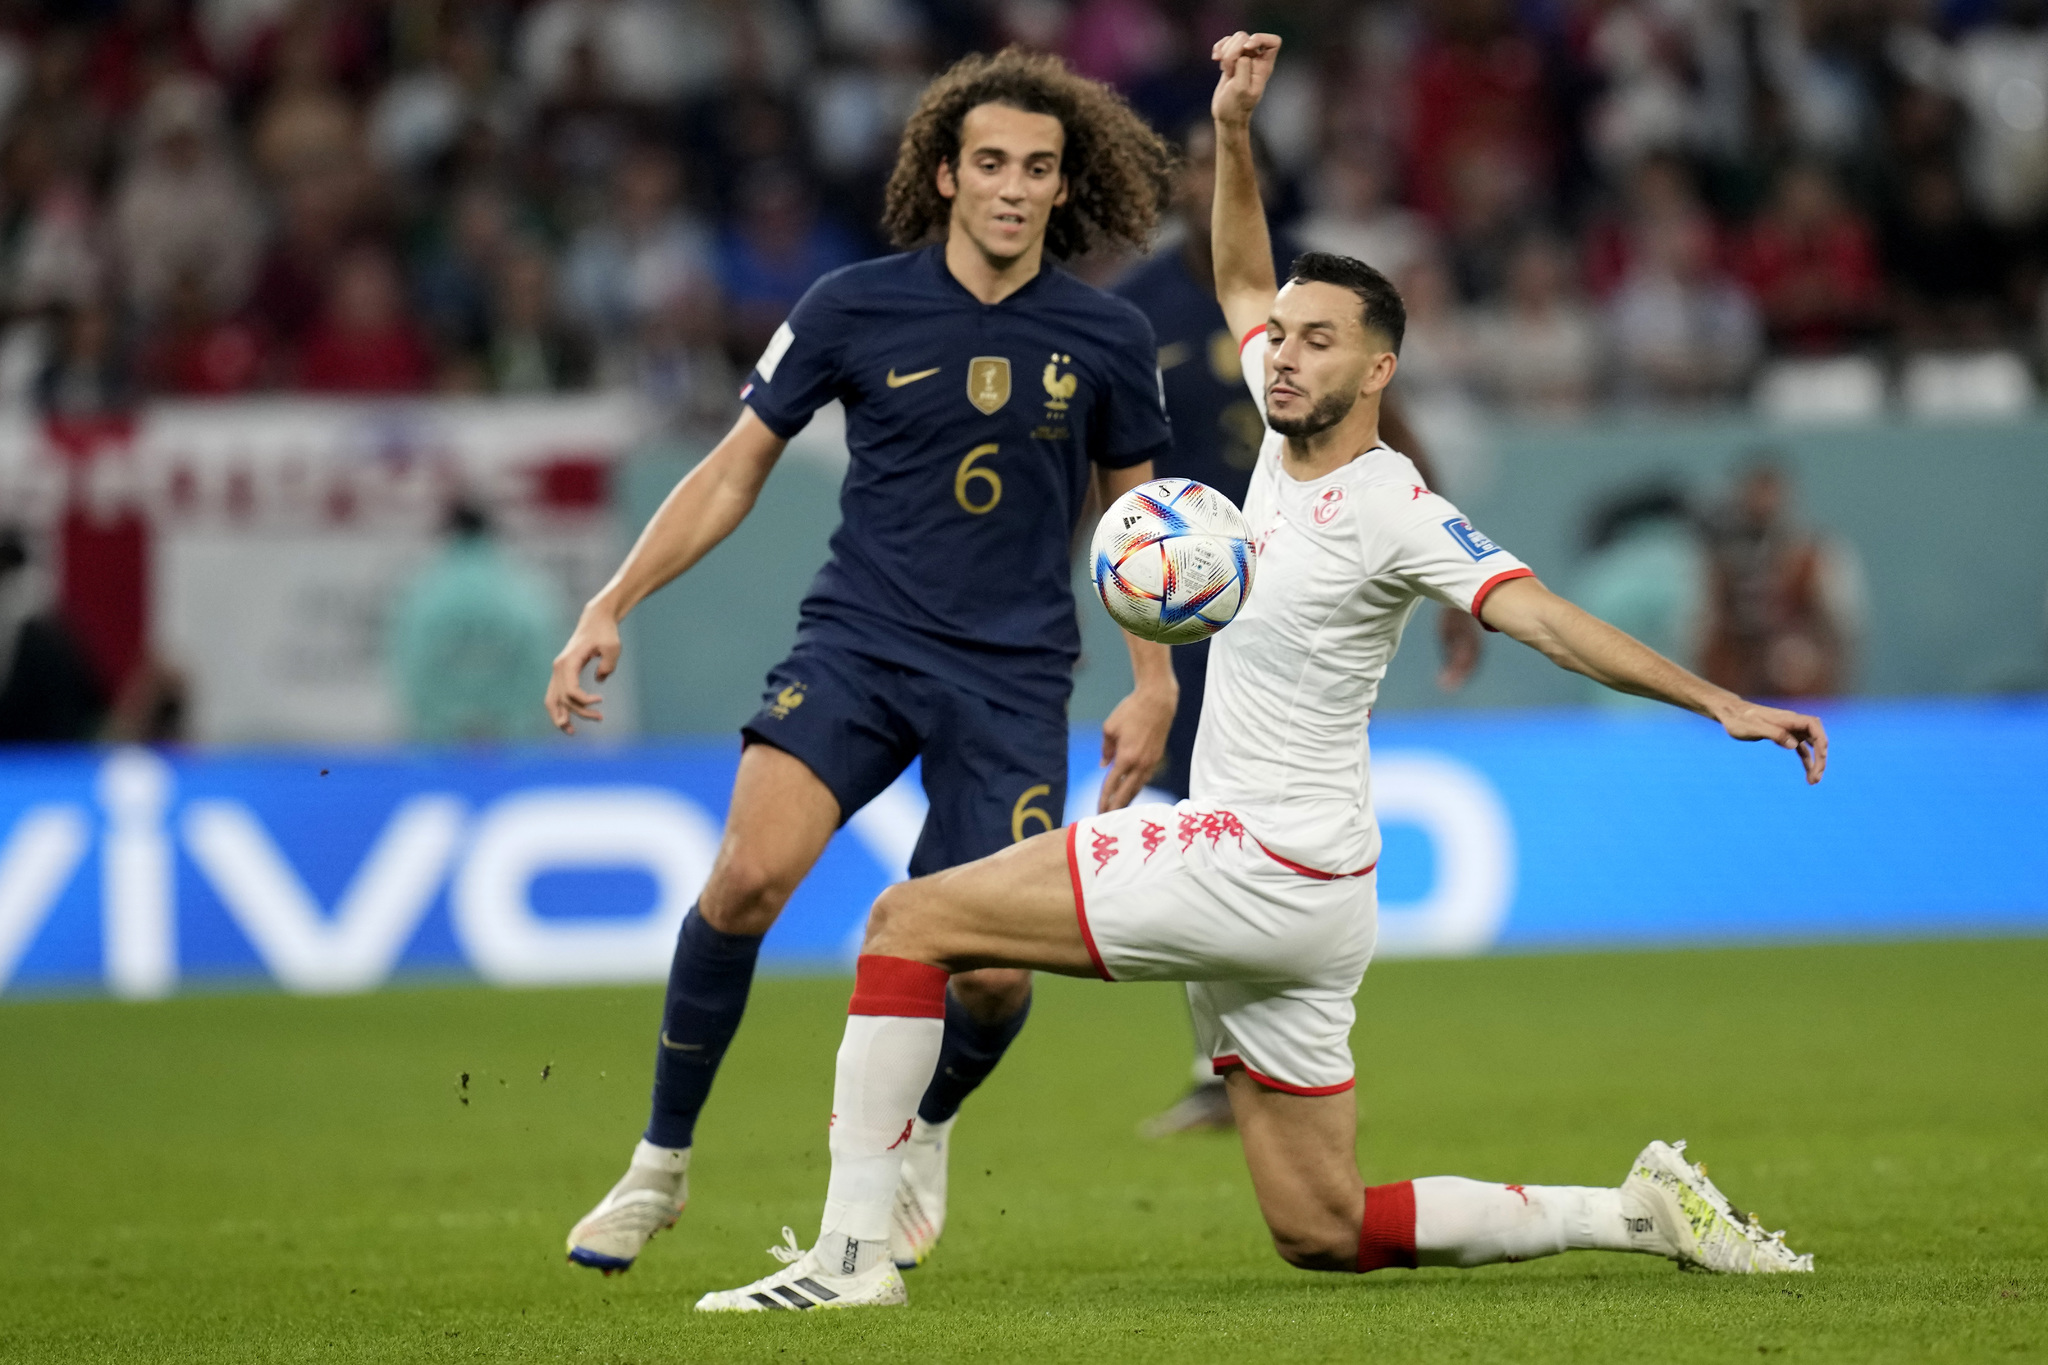 France's Matteo  lt;HIT gt;Guendouzi lt;/HIT gt; , left, watches Tunisia's Montassar Talbi controlling the ball during the World Cup group D soccer match between Tunisia and France at the Education City Stadium in Al Rayyan , Qatar, Wednesday, Nov. 30, 2022. (AP Photo/Christophe Ena)